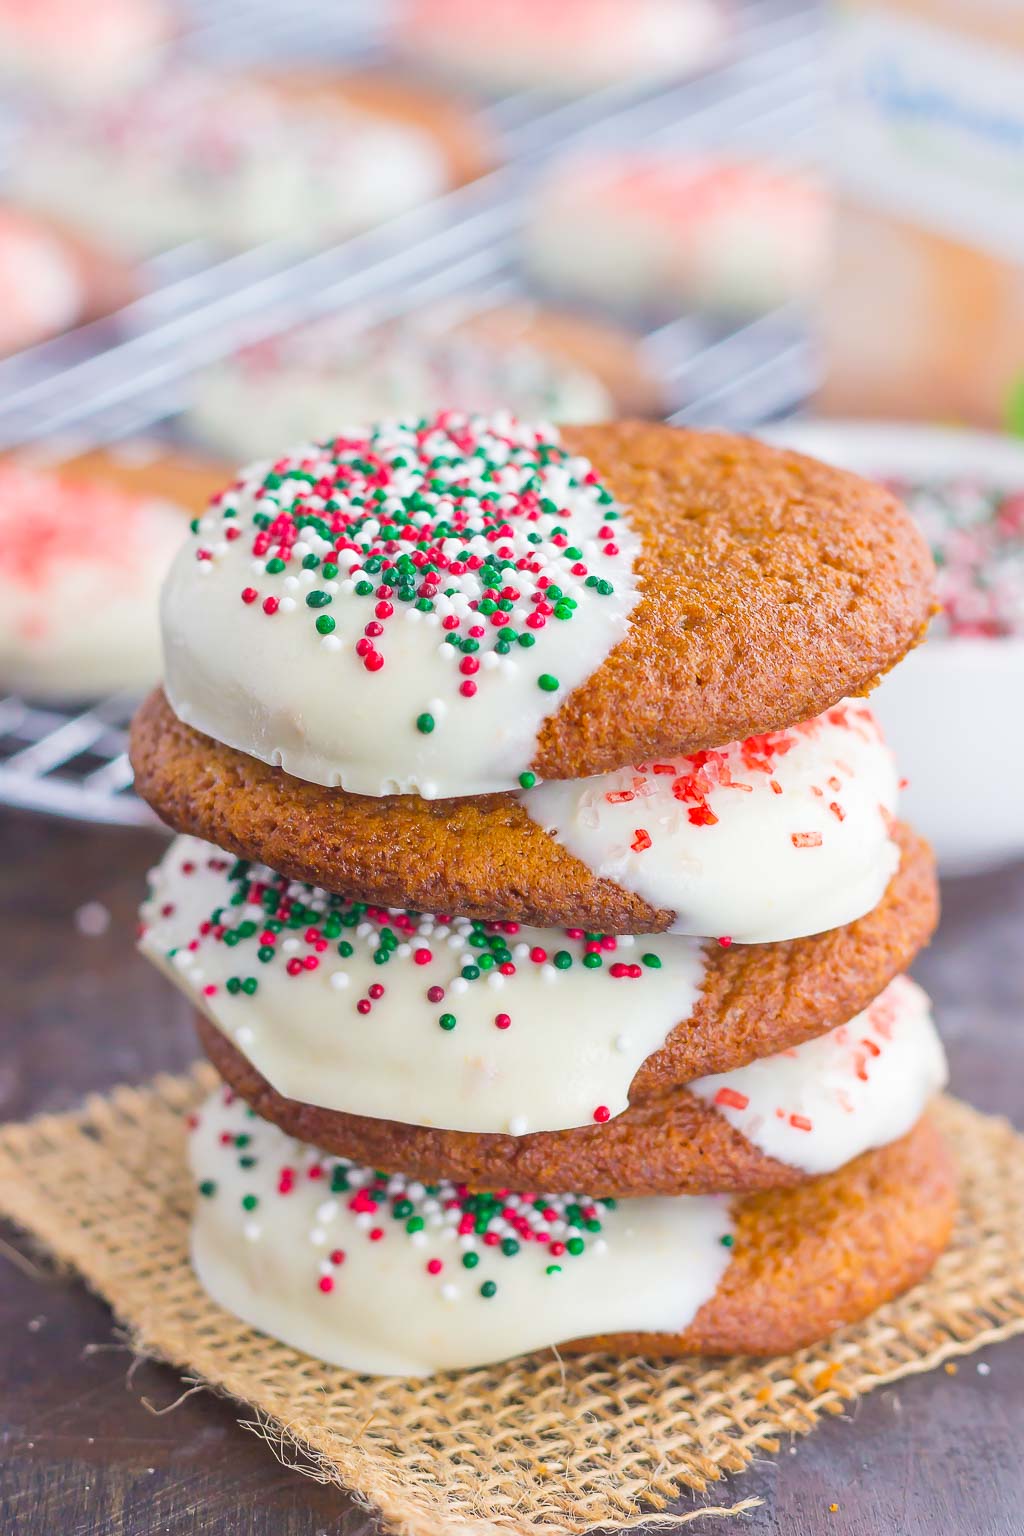 These White Chocolate Dipped Gingersnap Cookies are soft and chewy on the inside, while crisp on the outside. Filled with cozy spices and topped with creamy white chocolate, these cookies will be the hit of the holiday dessert table!